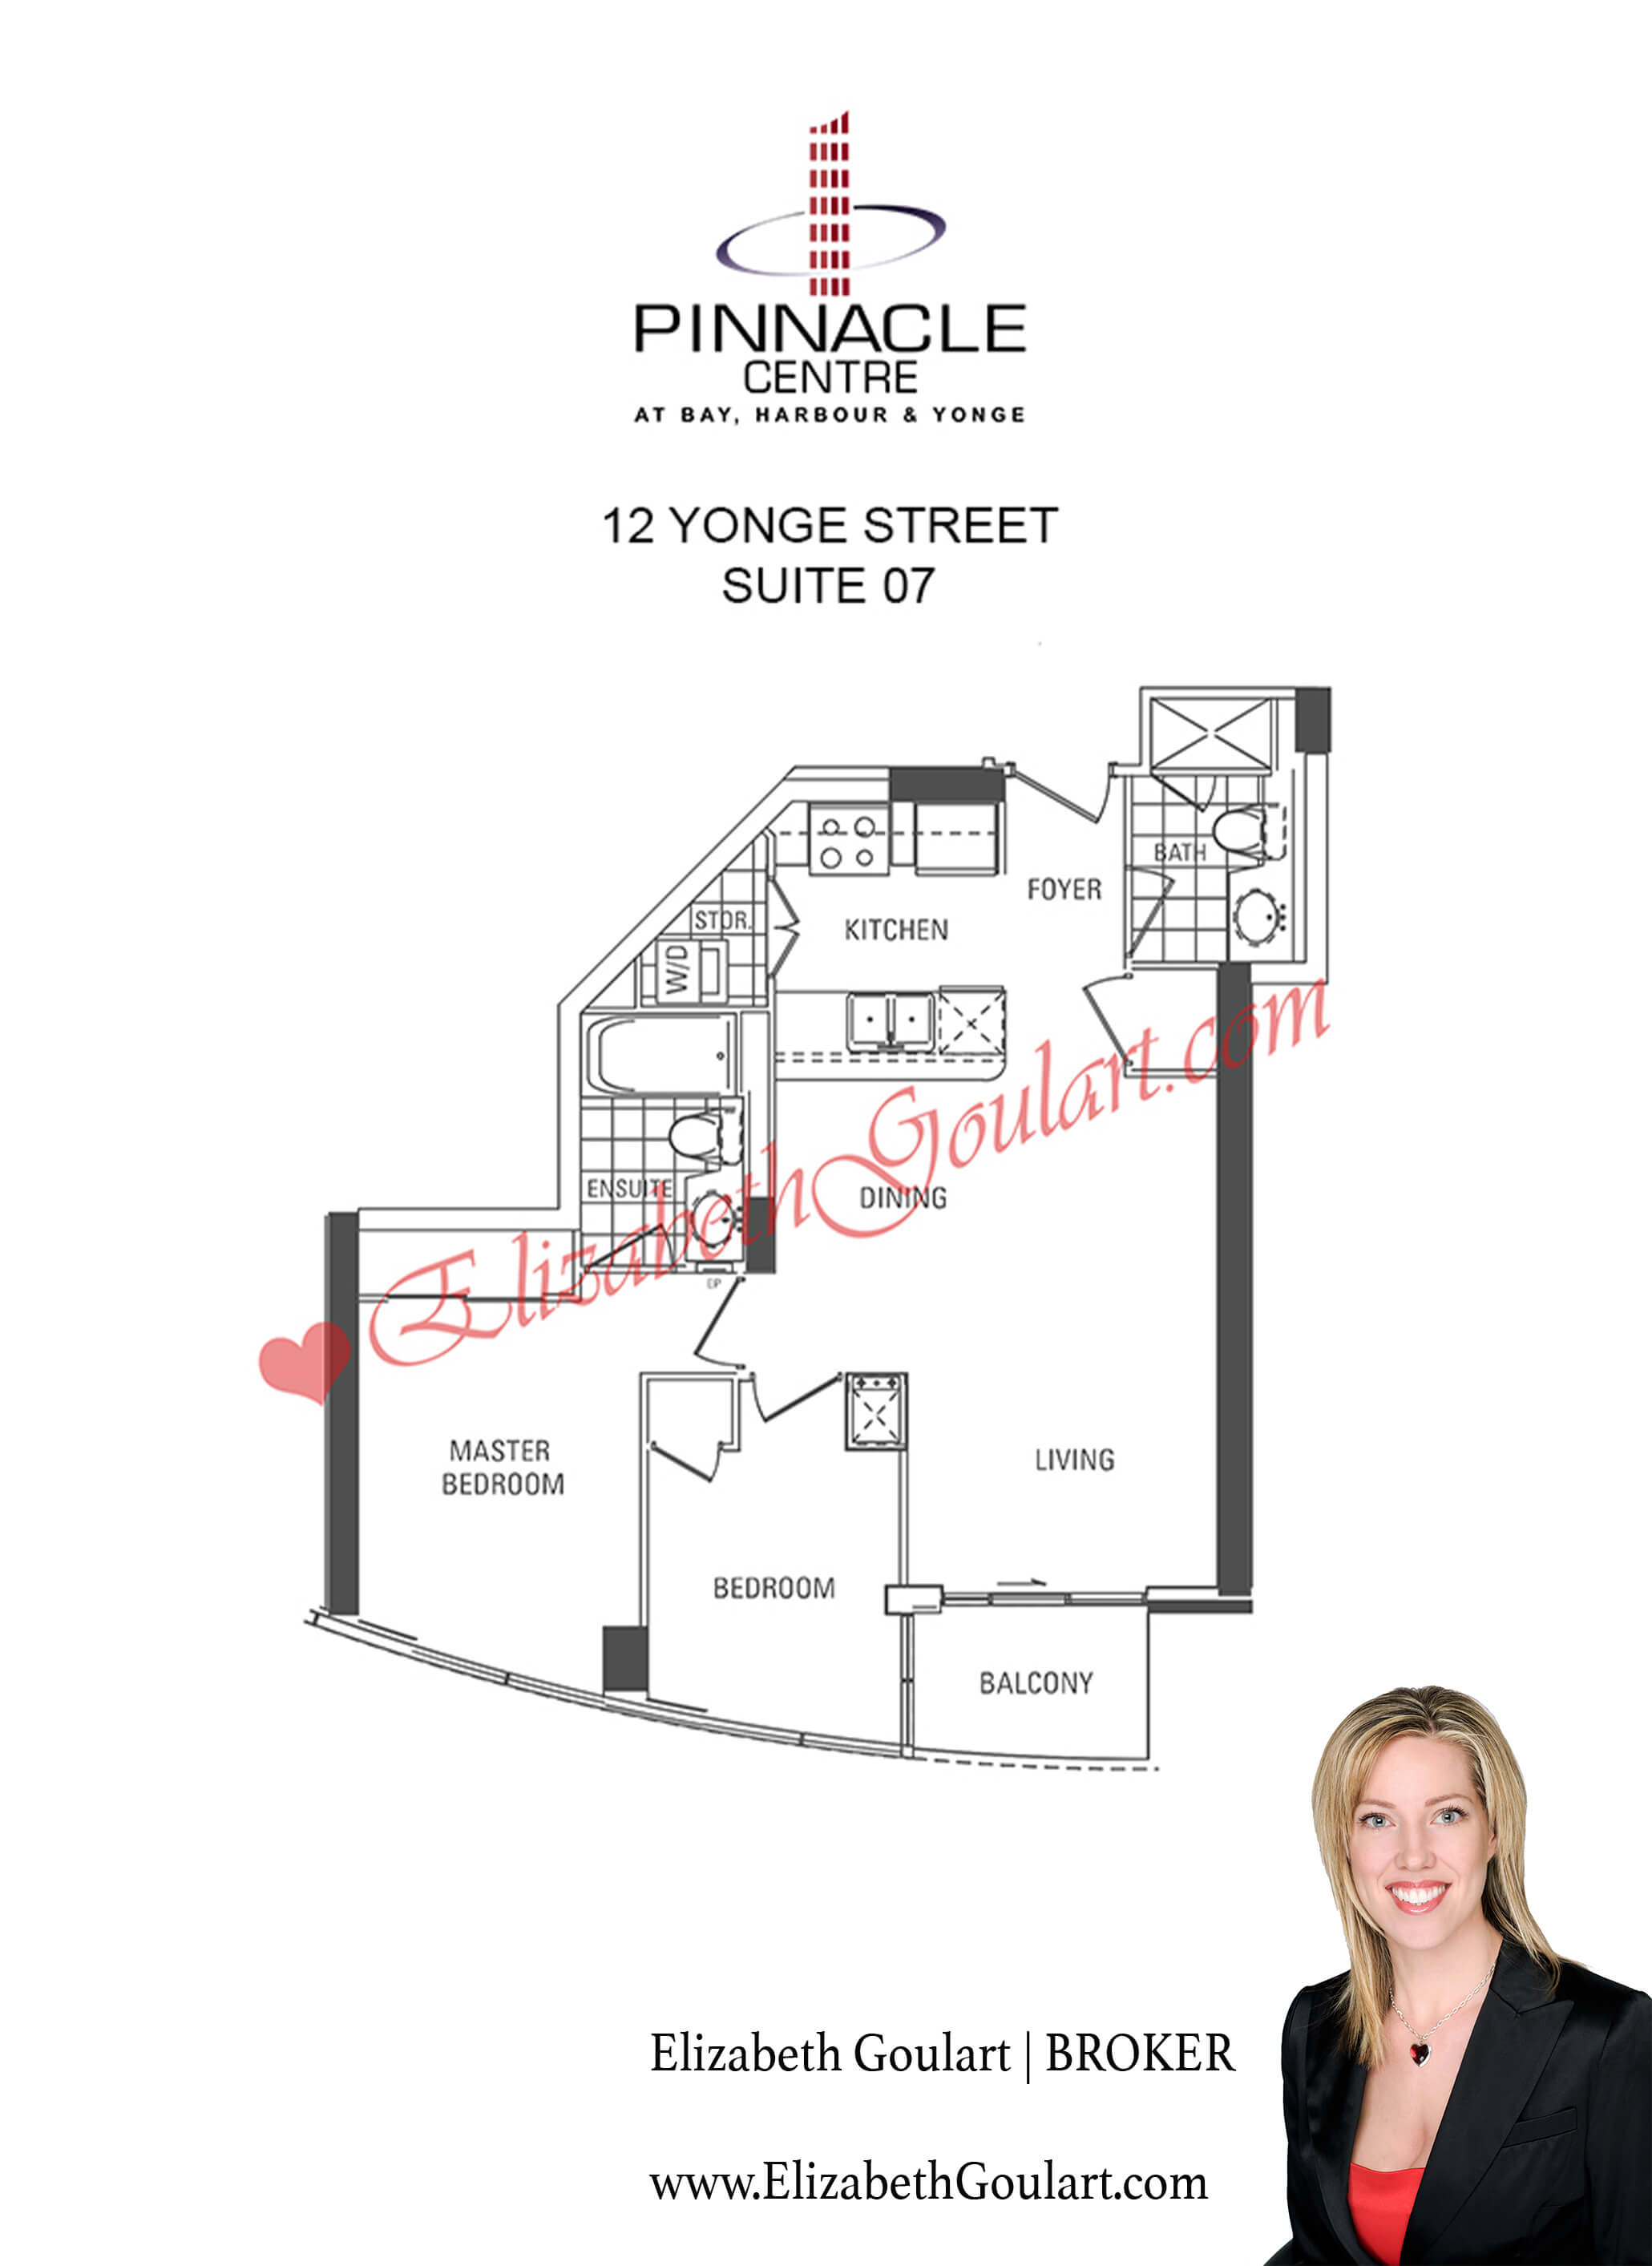 12 Yonge Street Pinnacle Centre Condos For Sale / Rent